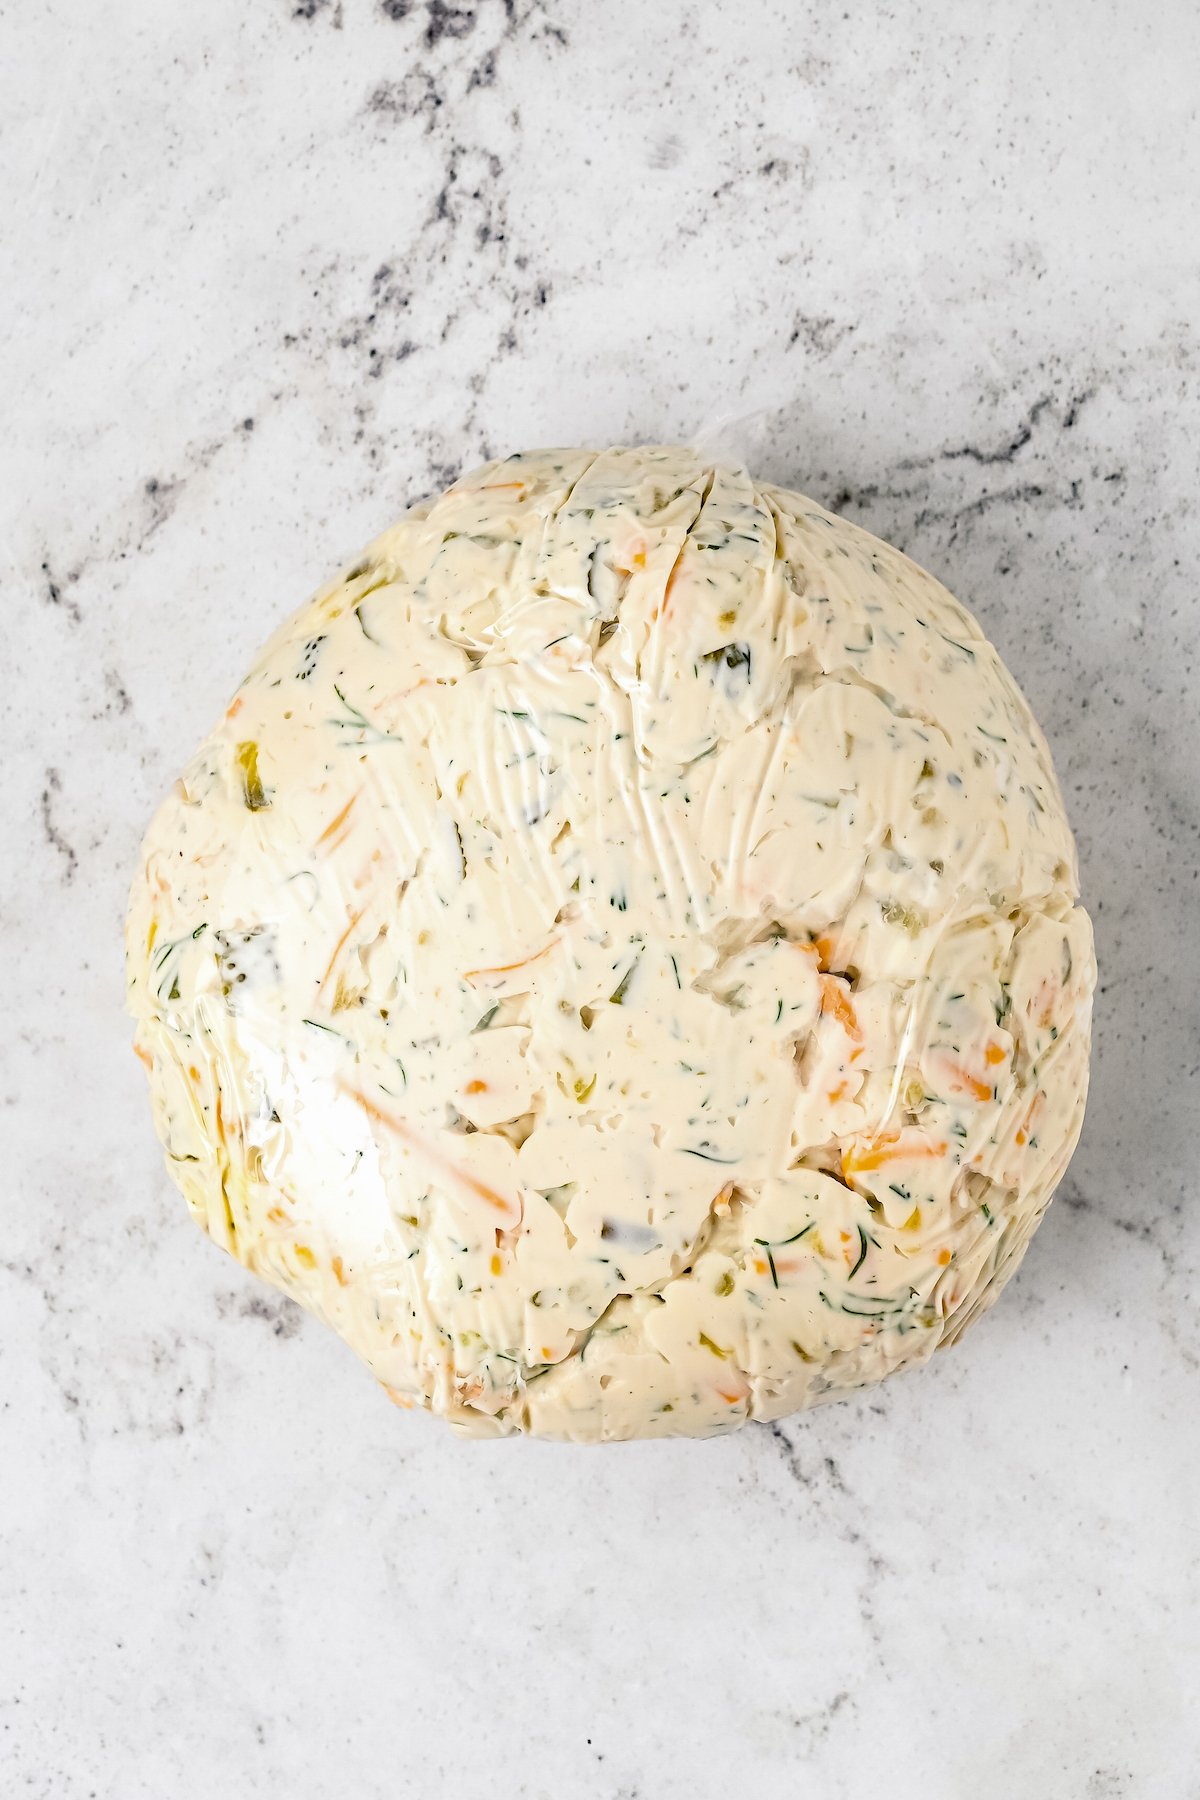 A cheese ball mixture tied up in plastic wrap.